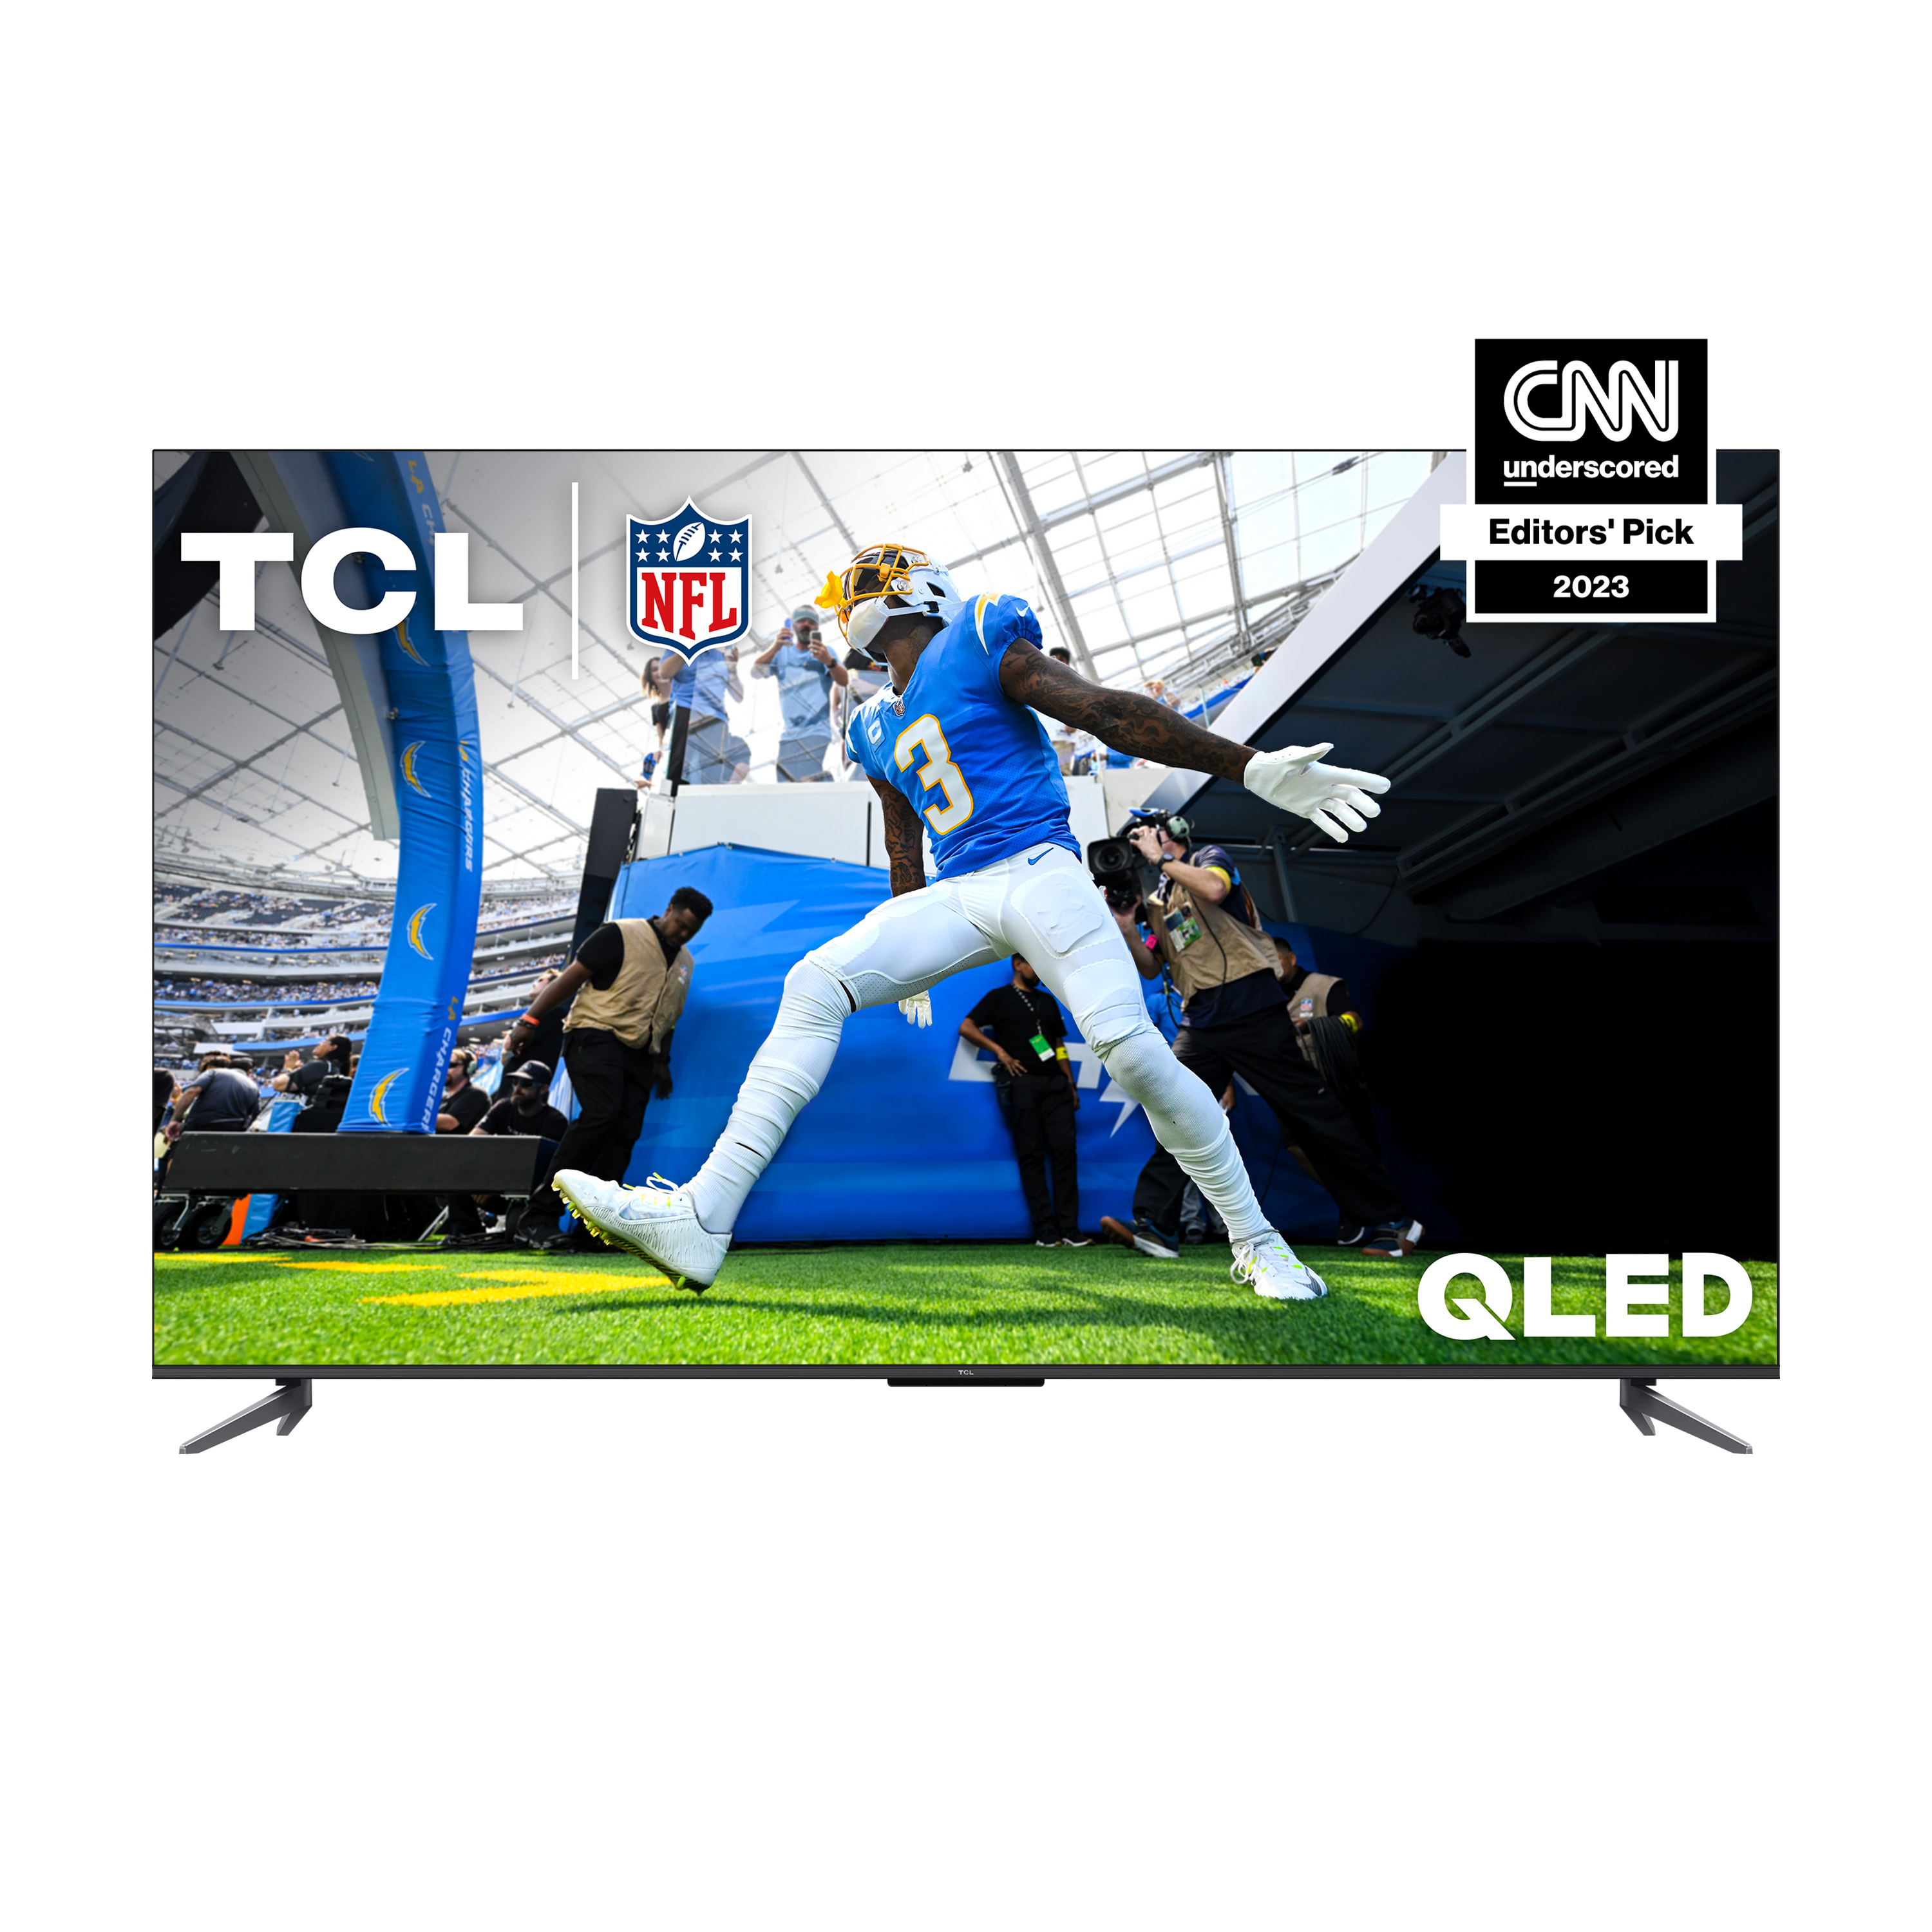 TCL 55” Class Q Class 4K QLED HDR Smart TV with Google TV, 55Q650G - image 1 of 17